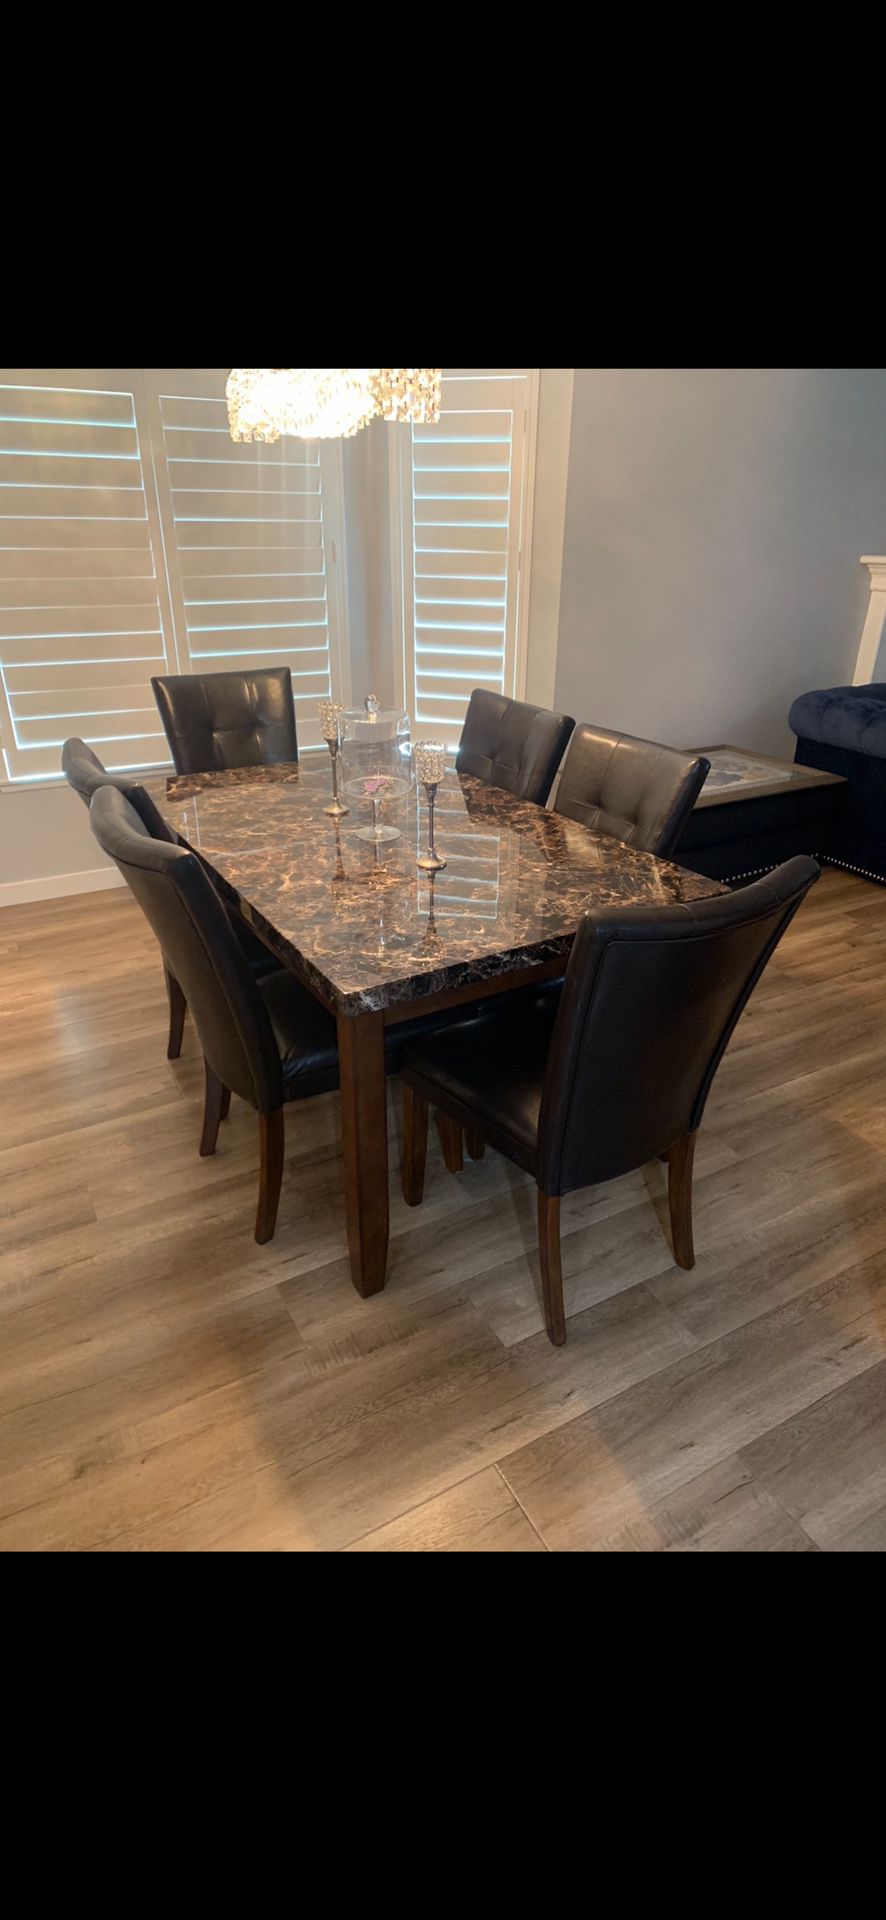 Ashley furniture dining table